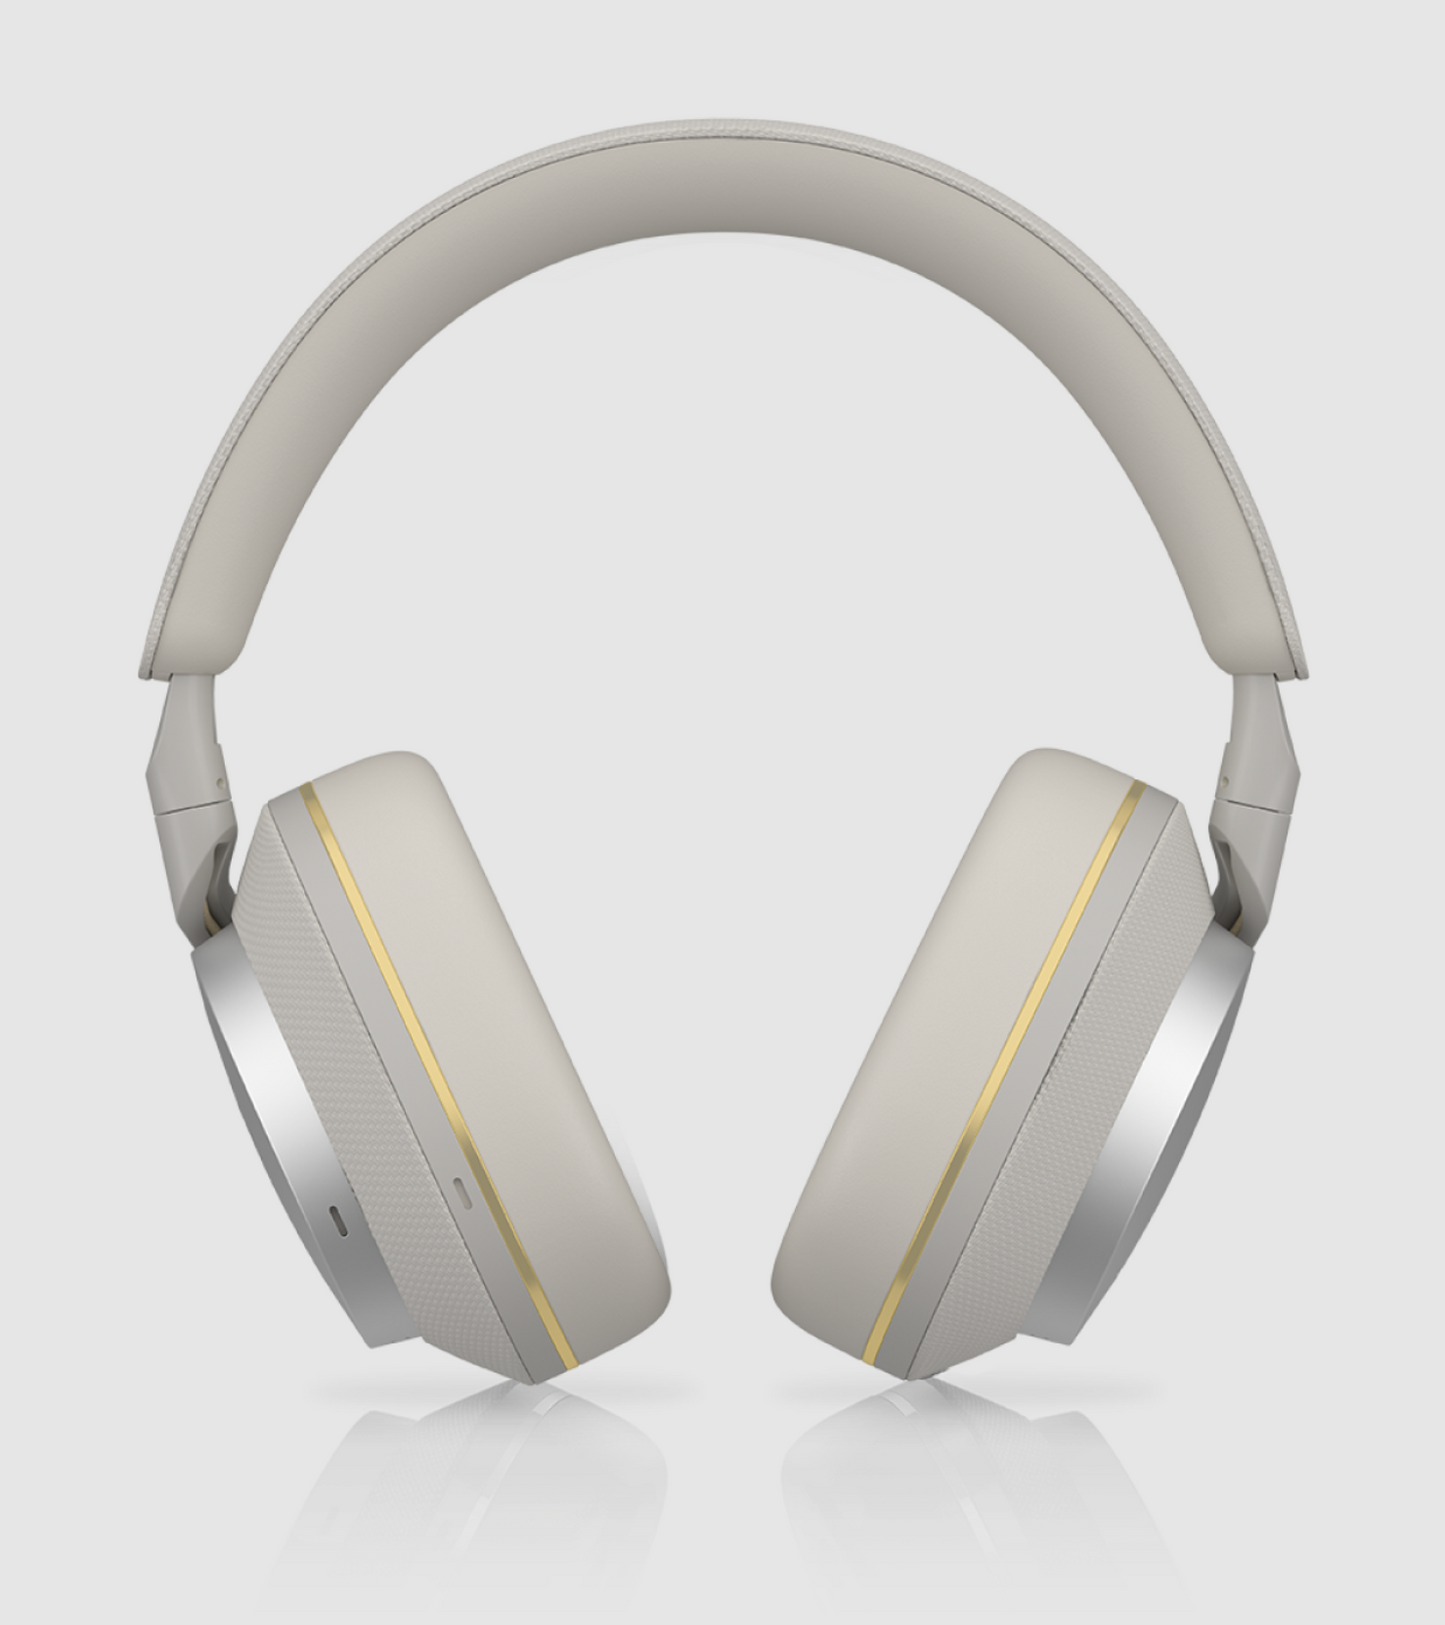 B&W Px7 S2e Noise Cancelling Headphones in Cloud Gray. Image of front